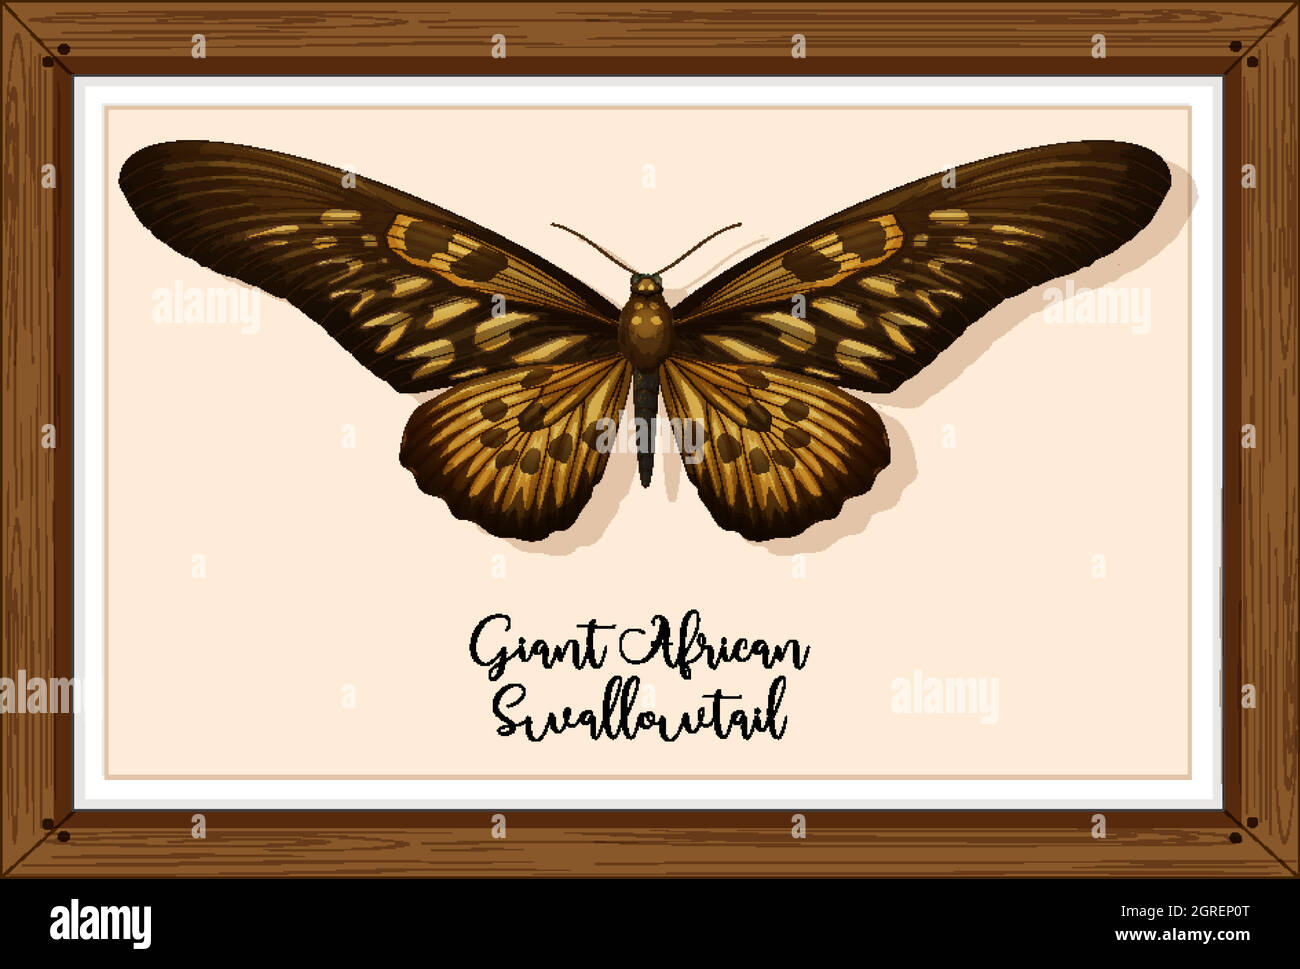 Butterfly on wooden frame Stock Vector